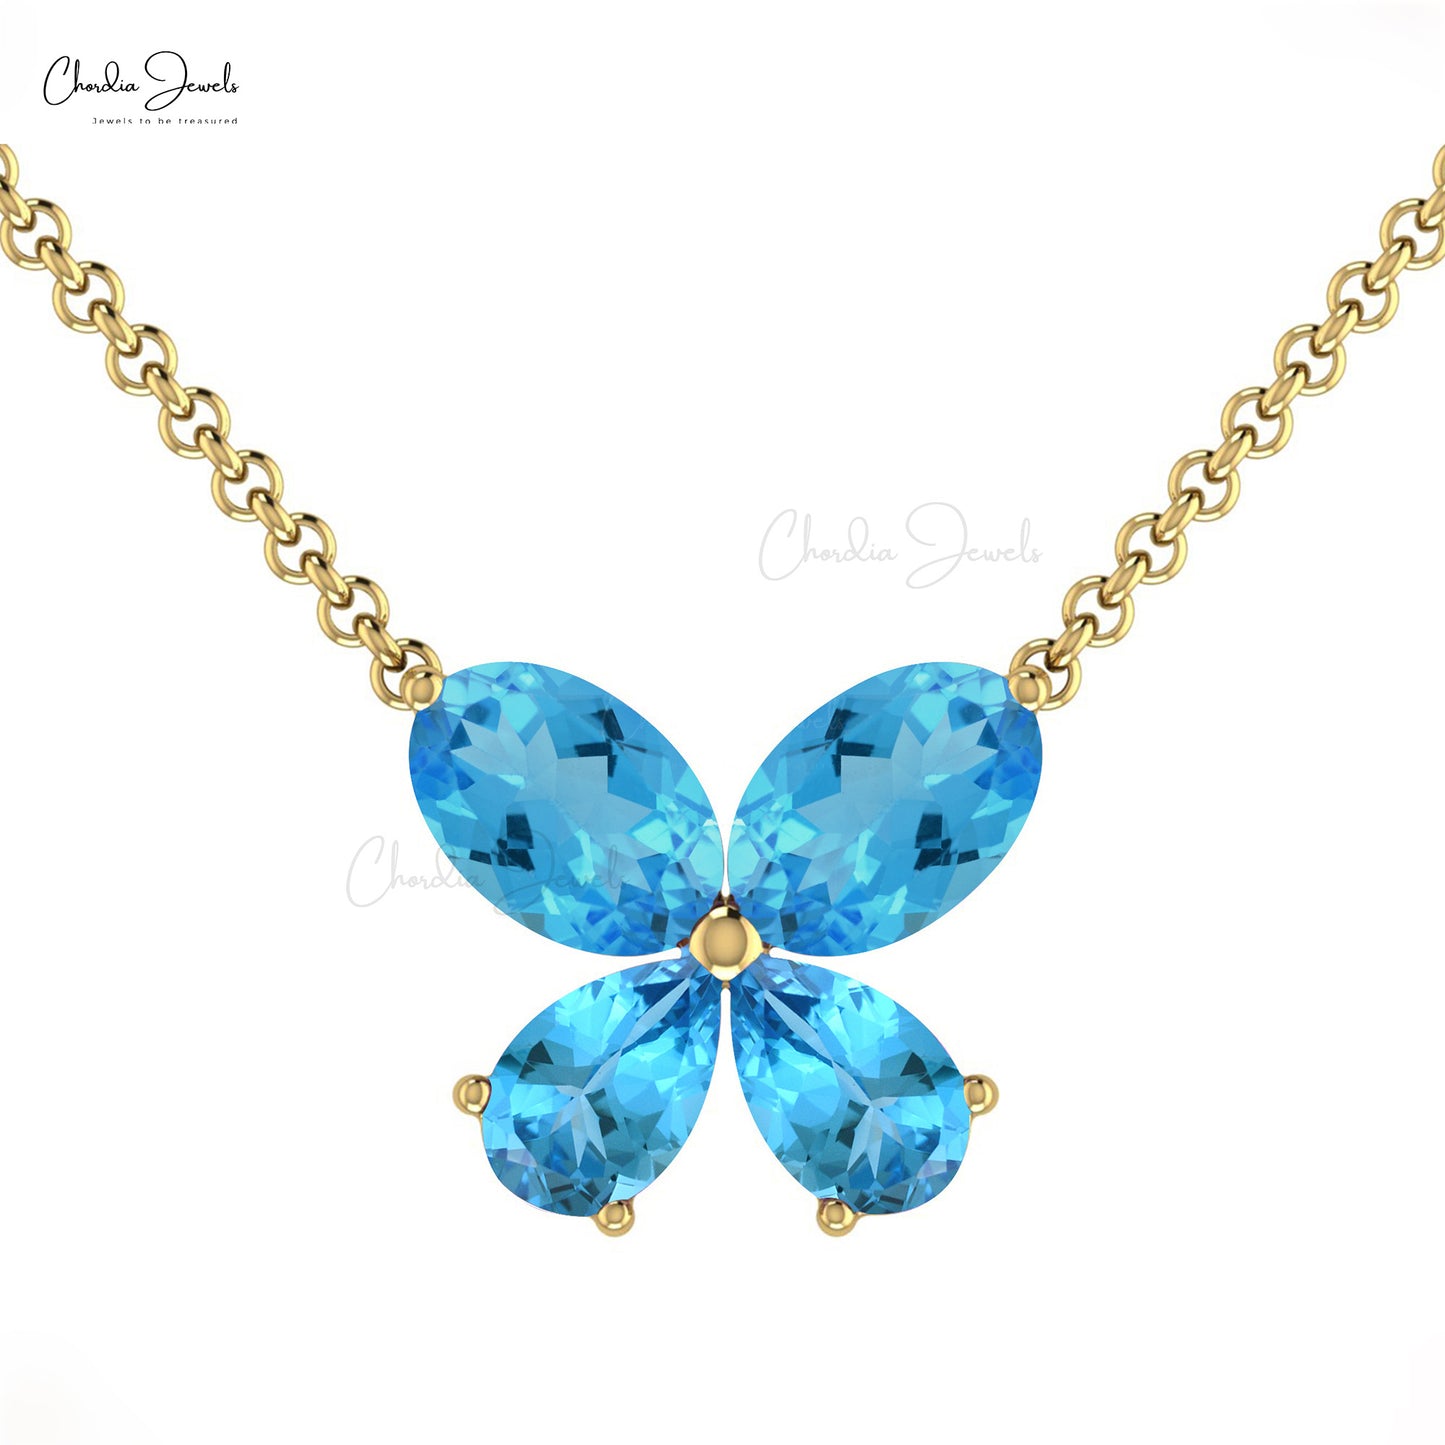 Load image into Gallery viewer, Beautiful Blue Butterfly Necklace For Women Genuine Swiss Blue Topaz Charms Necklace Pendant 14k Real Gold Minimalist Jewelry For Wife
